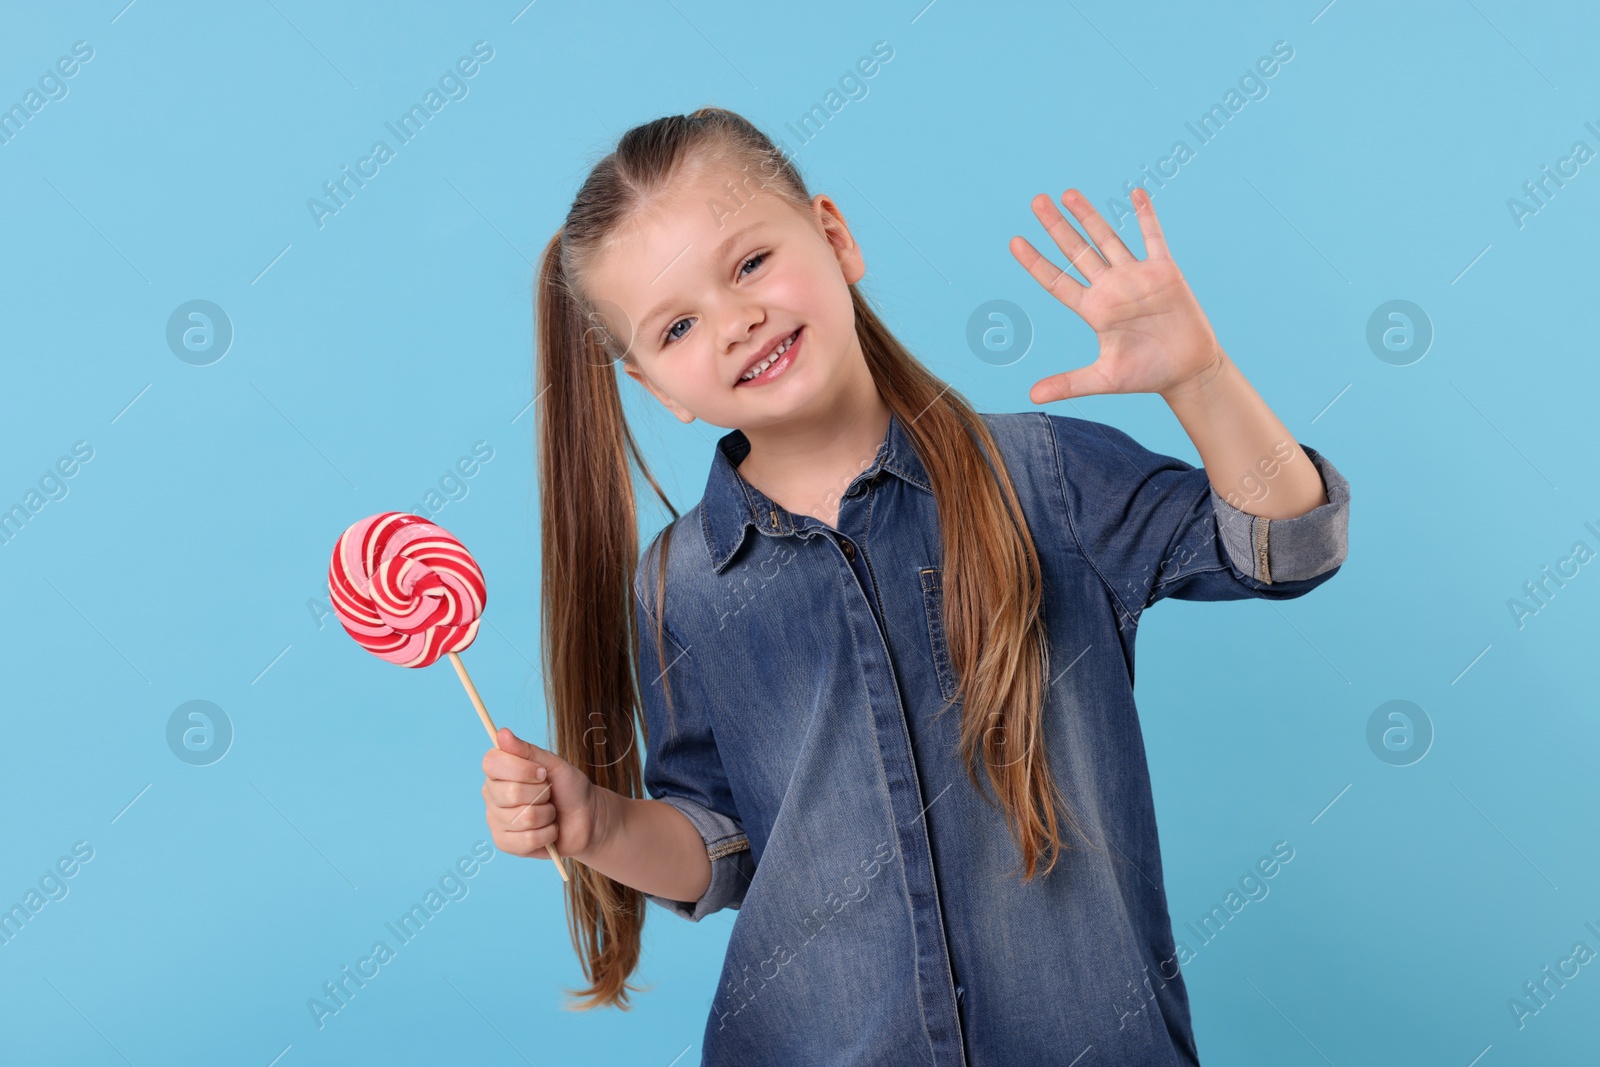 Photo of Happy little girl with bright lollipop swirl on light blue background